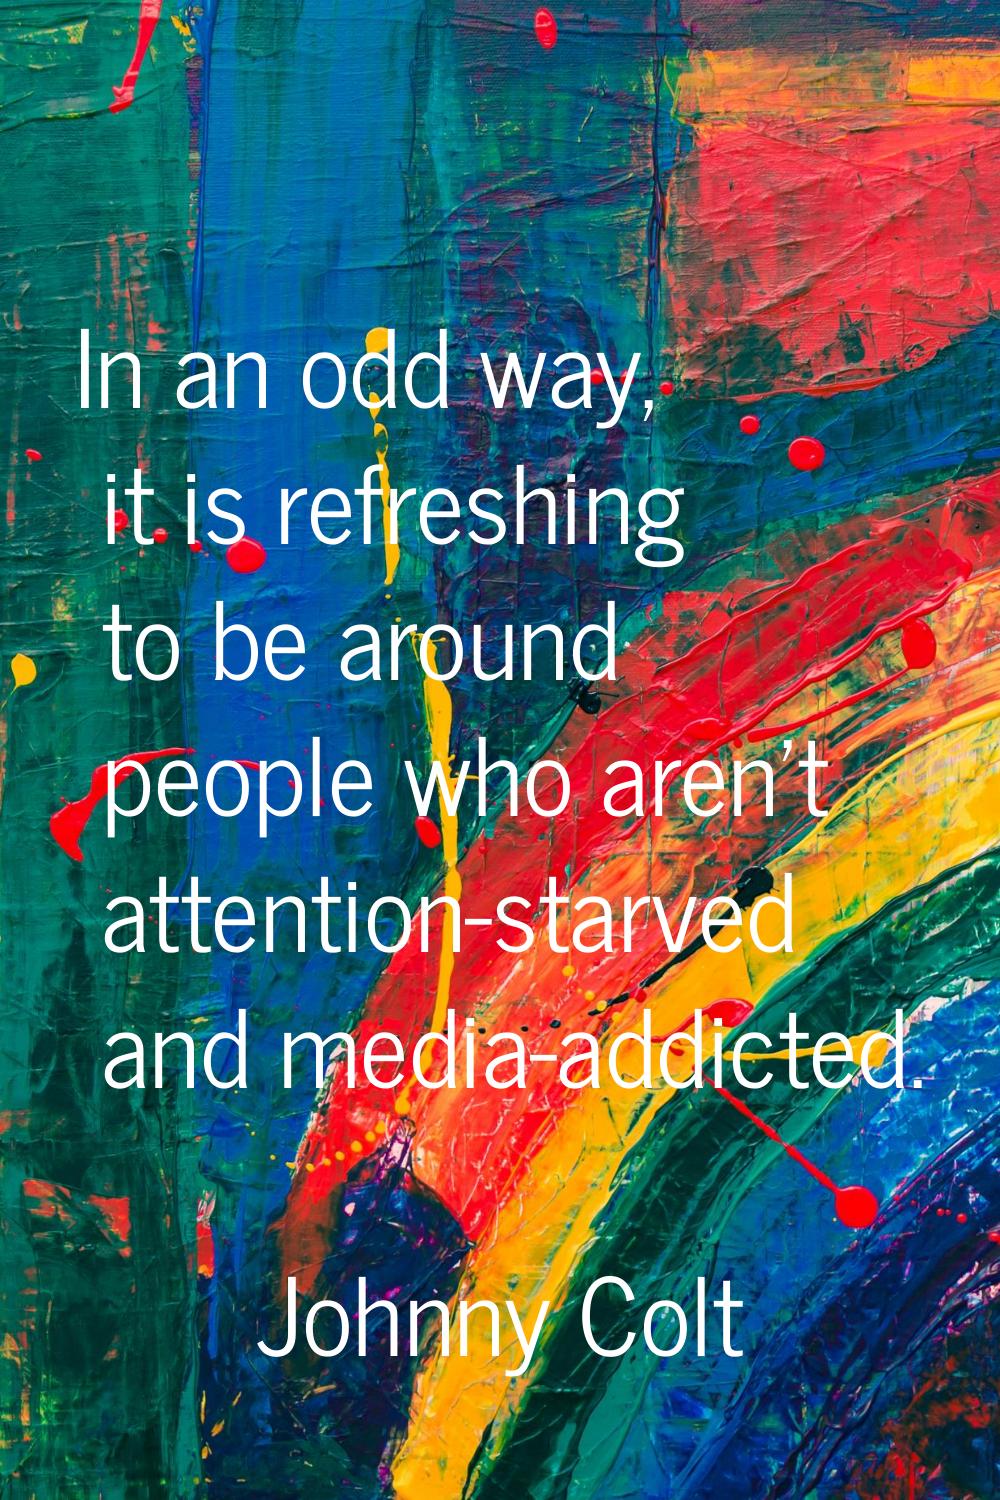 In an odd way, it is refreshing to be around people who aren't attention-starved and media-addicted